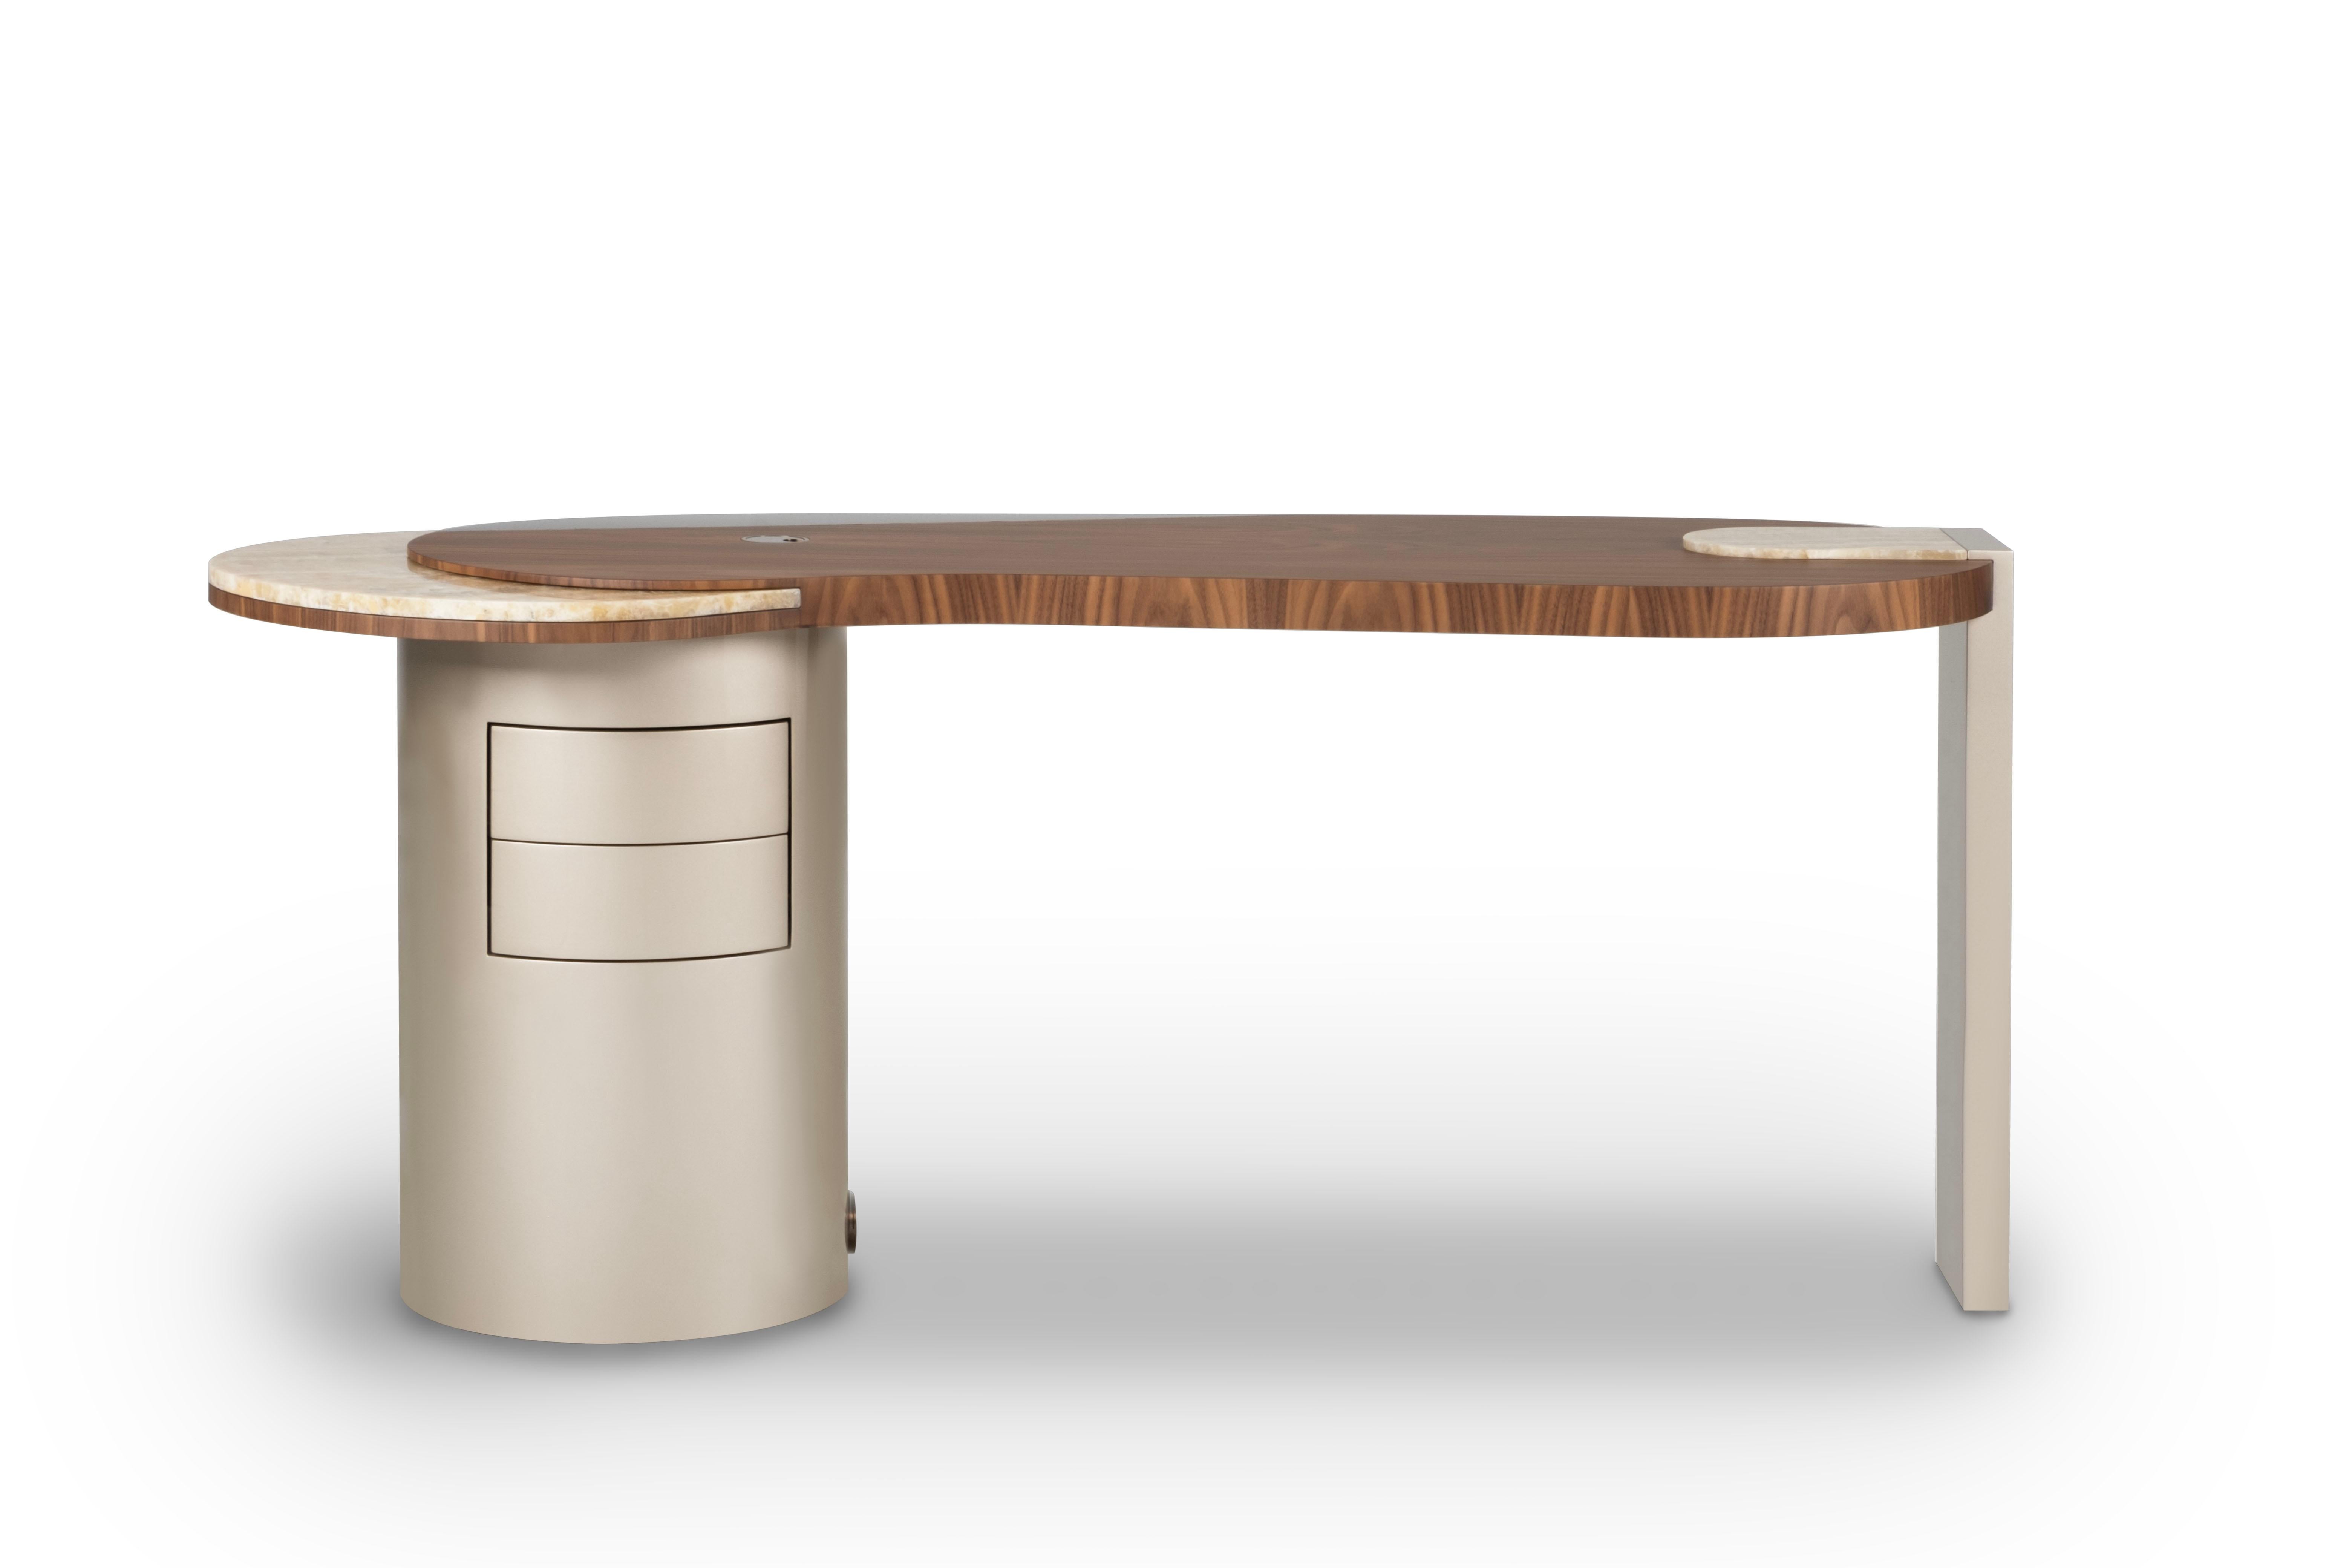 Armona Desk, Contemporary Collection, Handcrafted in Portugal - Europe by Greenapple.

Designed by Rute Martins for the Contemporary Collection, the Armona modern desk pays homage to the natural beauty and organic lines of Armona island.